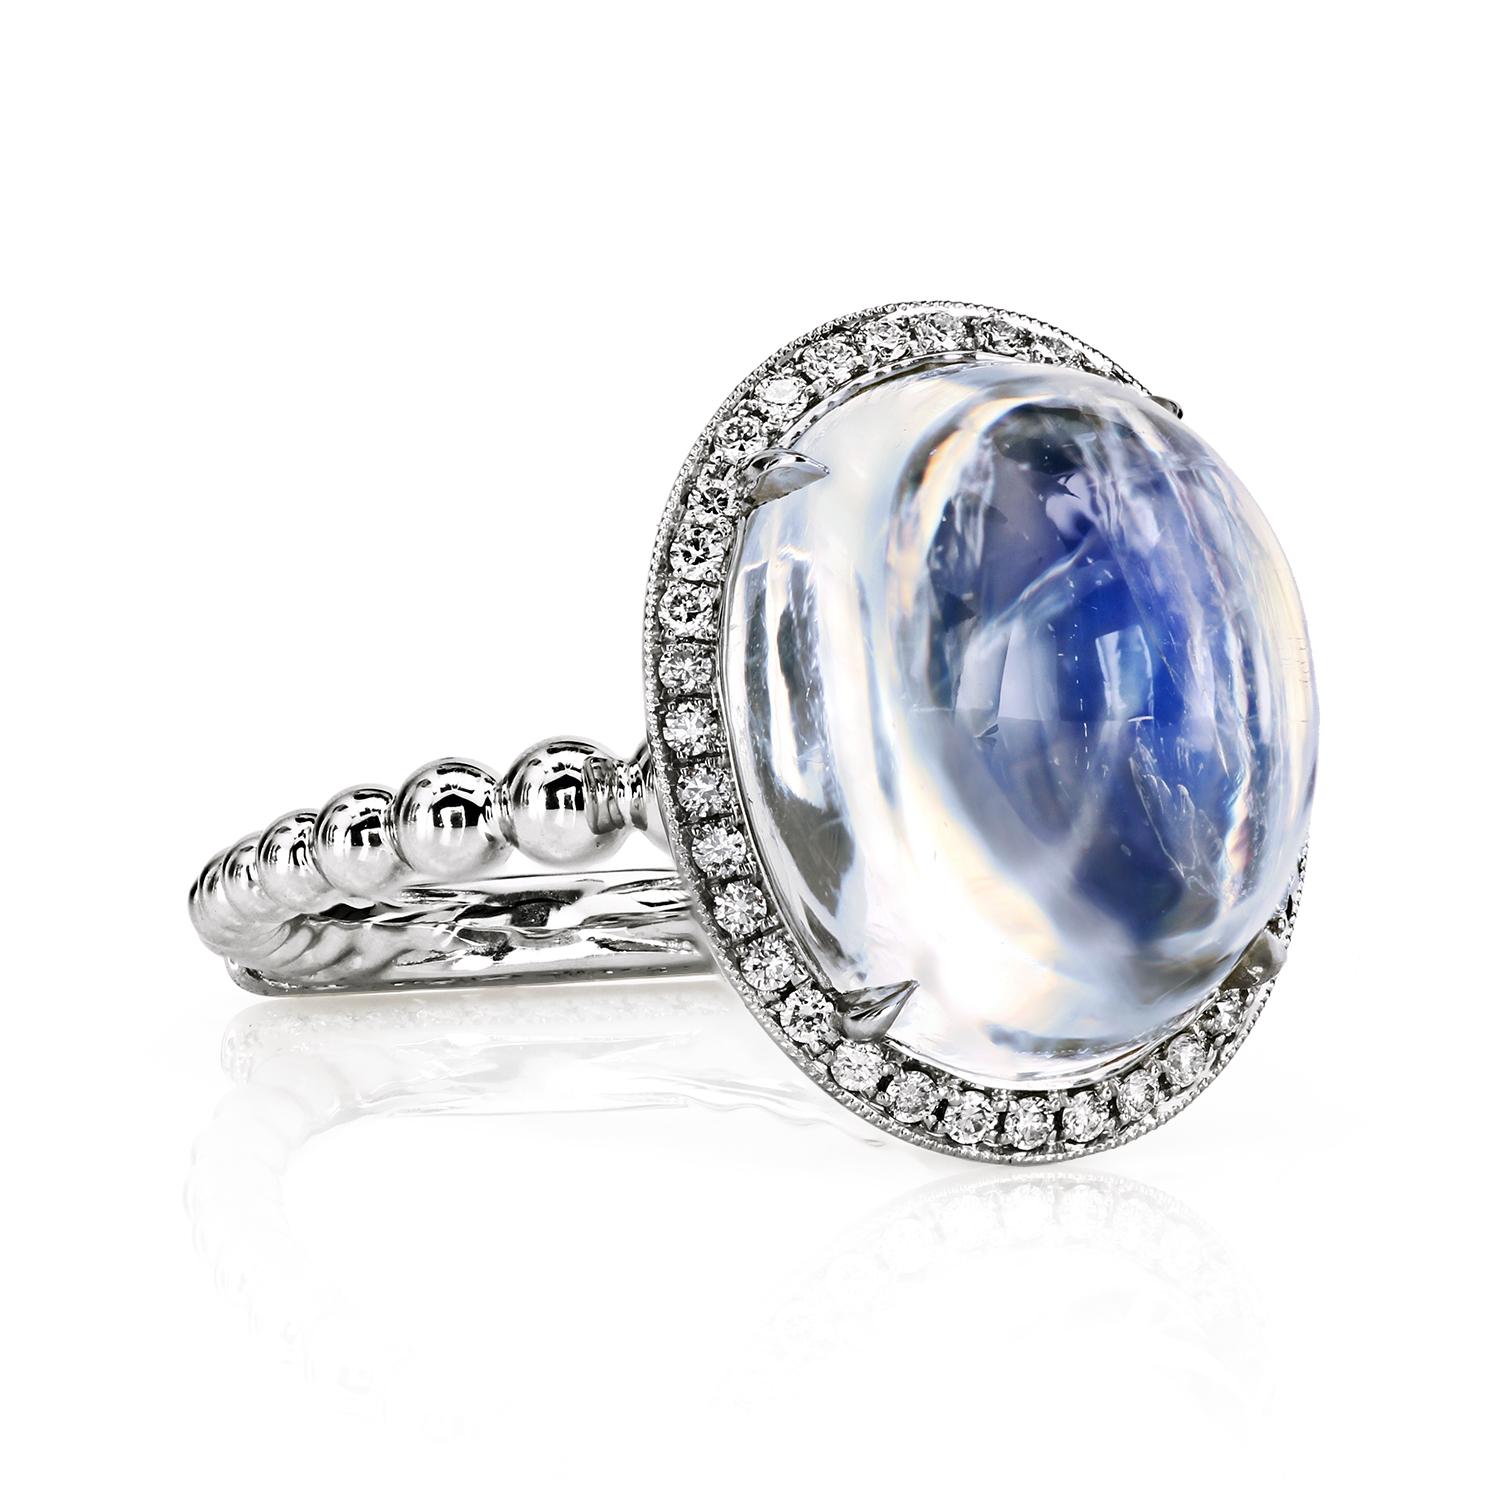 For decades, Leon Mege work is fueled by his affordable couture concept that resonates well with collectors from around the world. 

The tall 13.42-carat moonstone cab charged with cosmic spirituality is the focal point of the couture ring design by